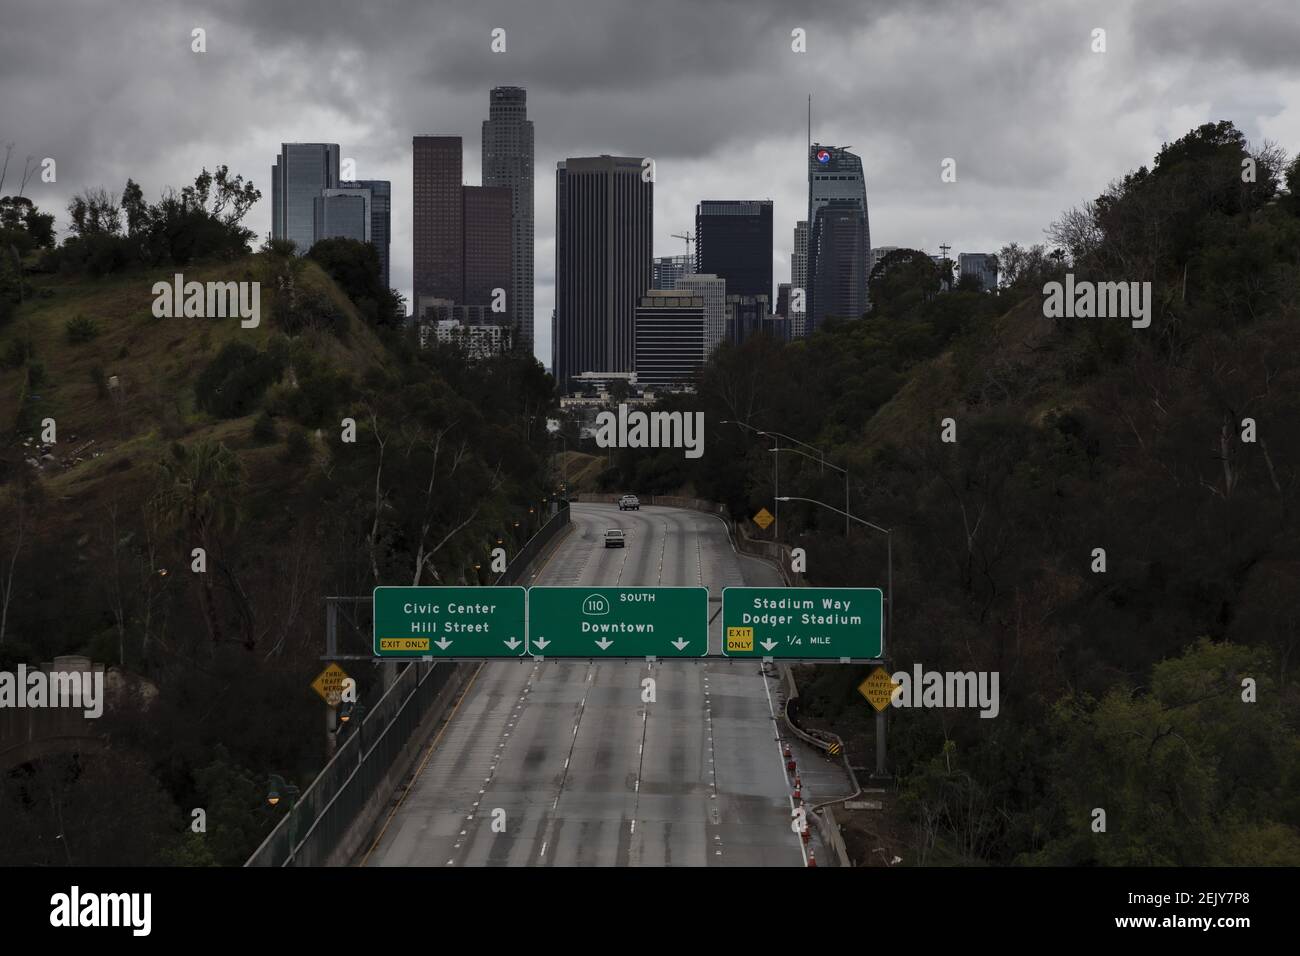 Los Angeles area freeways remain near empty due to Òstay at homeÓ orders by local authorities. Los Angeles is aggressively attempting to flatten itÕs curve of Covid-19 cases. 4/6/2020 Los Angeles, CA USA (Photo by Ted Soqui/SIPA USA)  Stock Photo